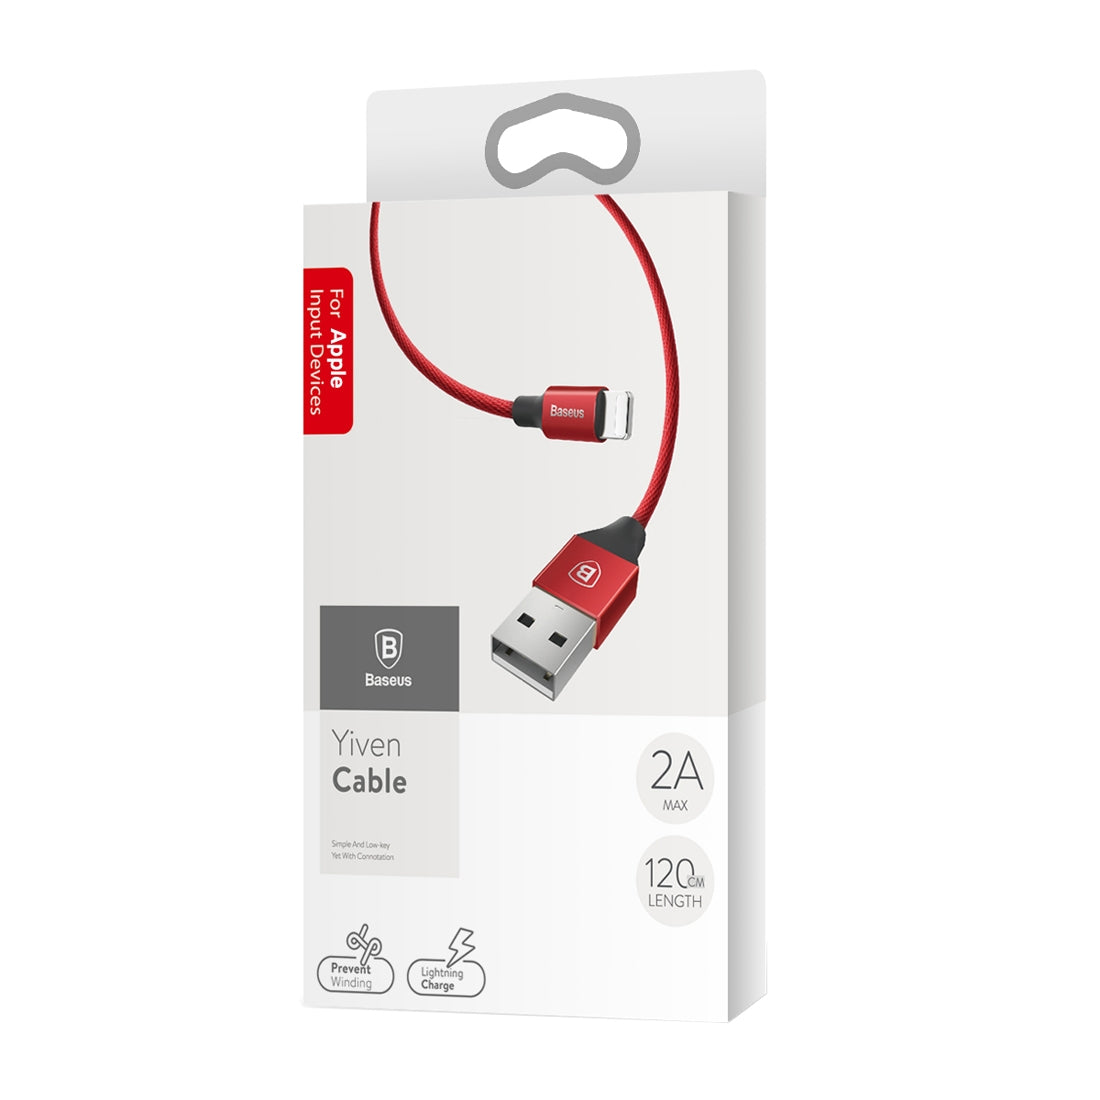 Baseus 1.8m 2A Yiven Cable Woven Style Metal Head 8 Pin to USB Data Sync Charging Cable for iPhone & iPad & iPod(Red)